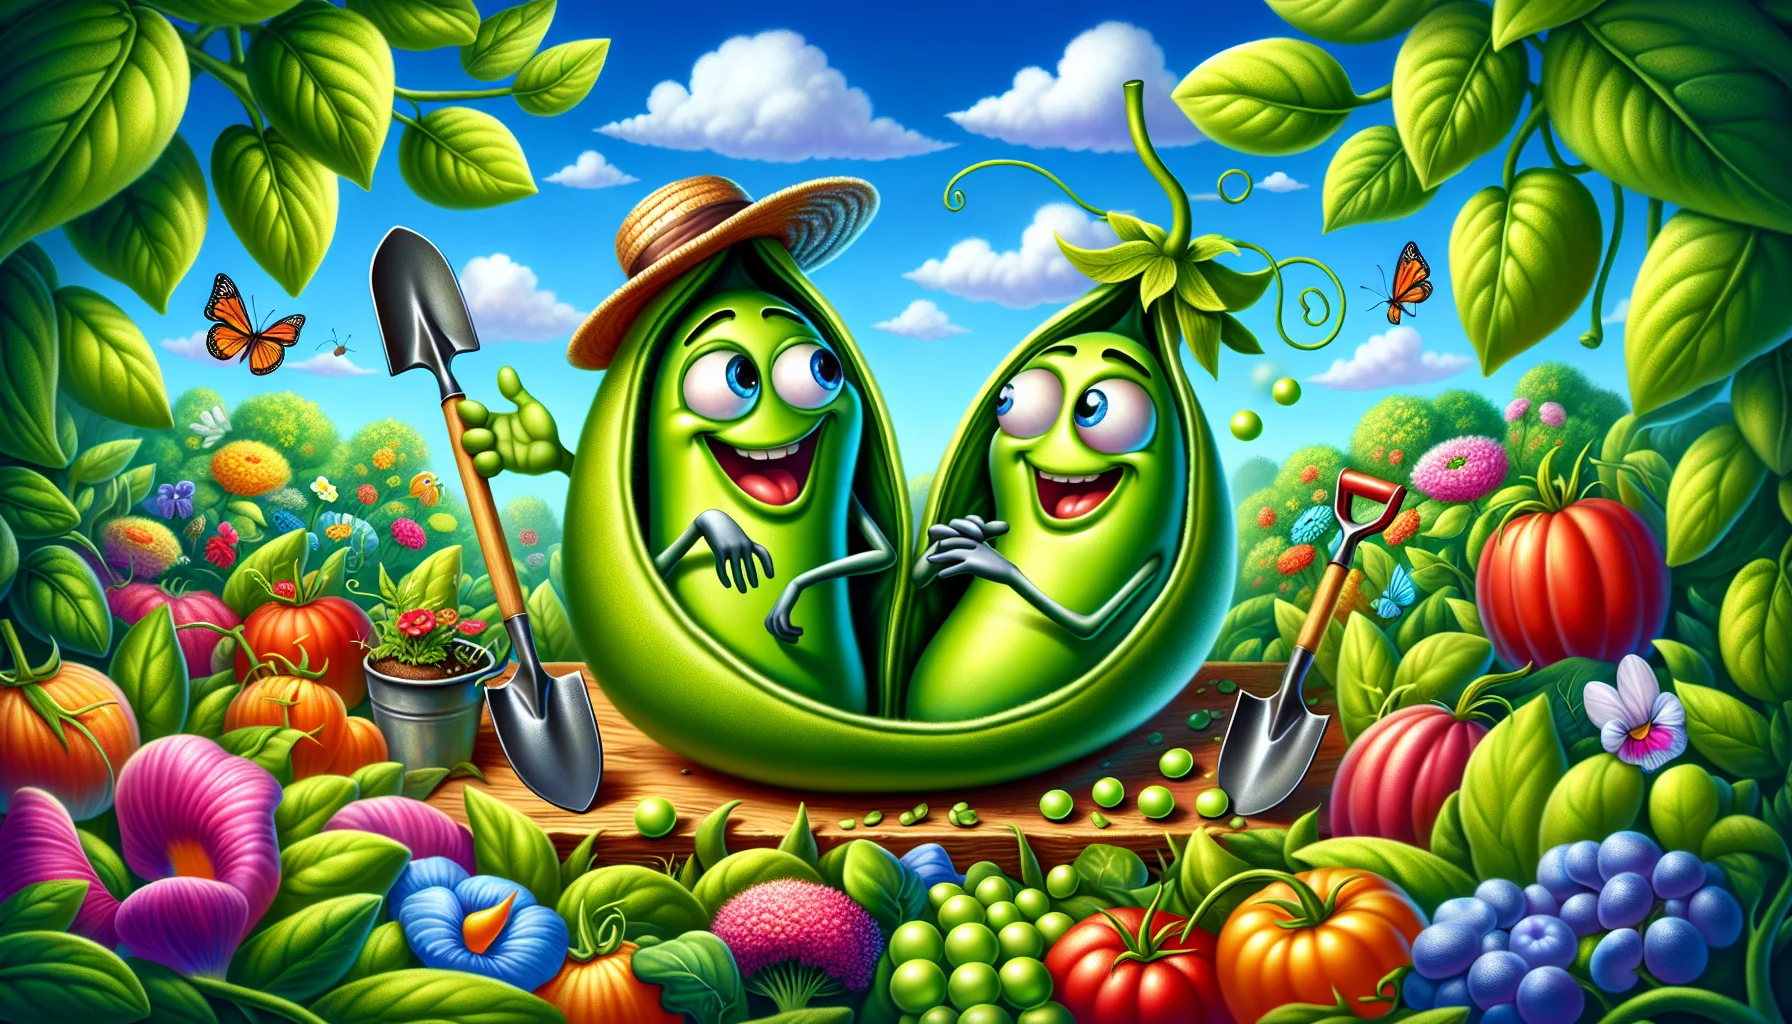 Create a vivid and entertaining image that shows a pair of googly-eyed peas in a pod, nestled in vibrant green leaves, engaging in a humorous dialogue. They're laughing and joking, one pea meticulously holding a tiny shovel while the other pea flamboyantly wearing a gardening hat. Surrounding them, a lush garden full of colorful blooming flowers, ripe vegetables, and busy insects under a blue sunny sky. The scene sets the tone for how enjoyable and amusing gardening can be, making it hard for anyone to resist the charm of digging into their garden.